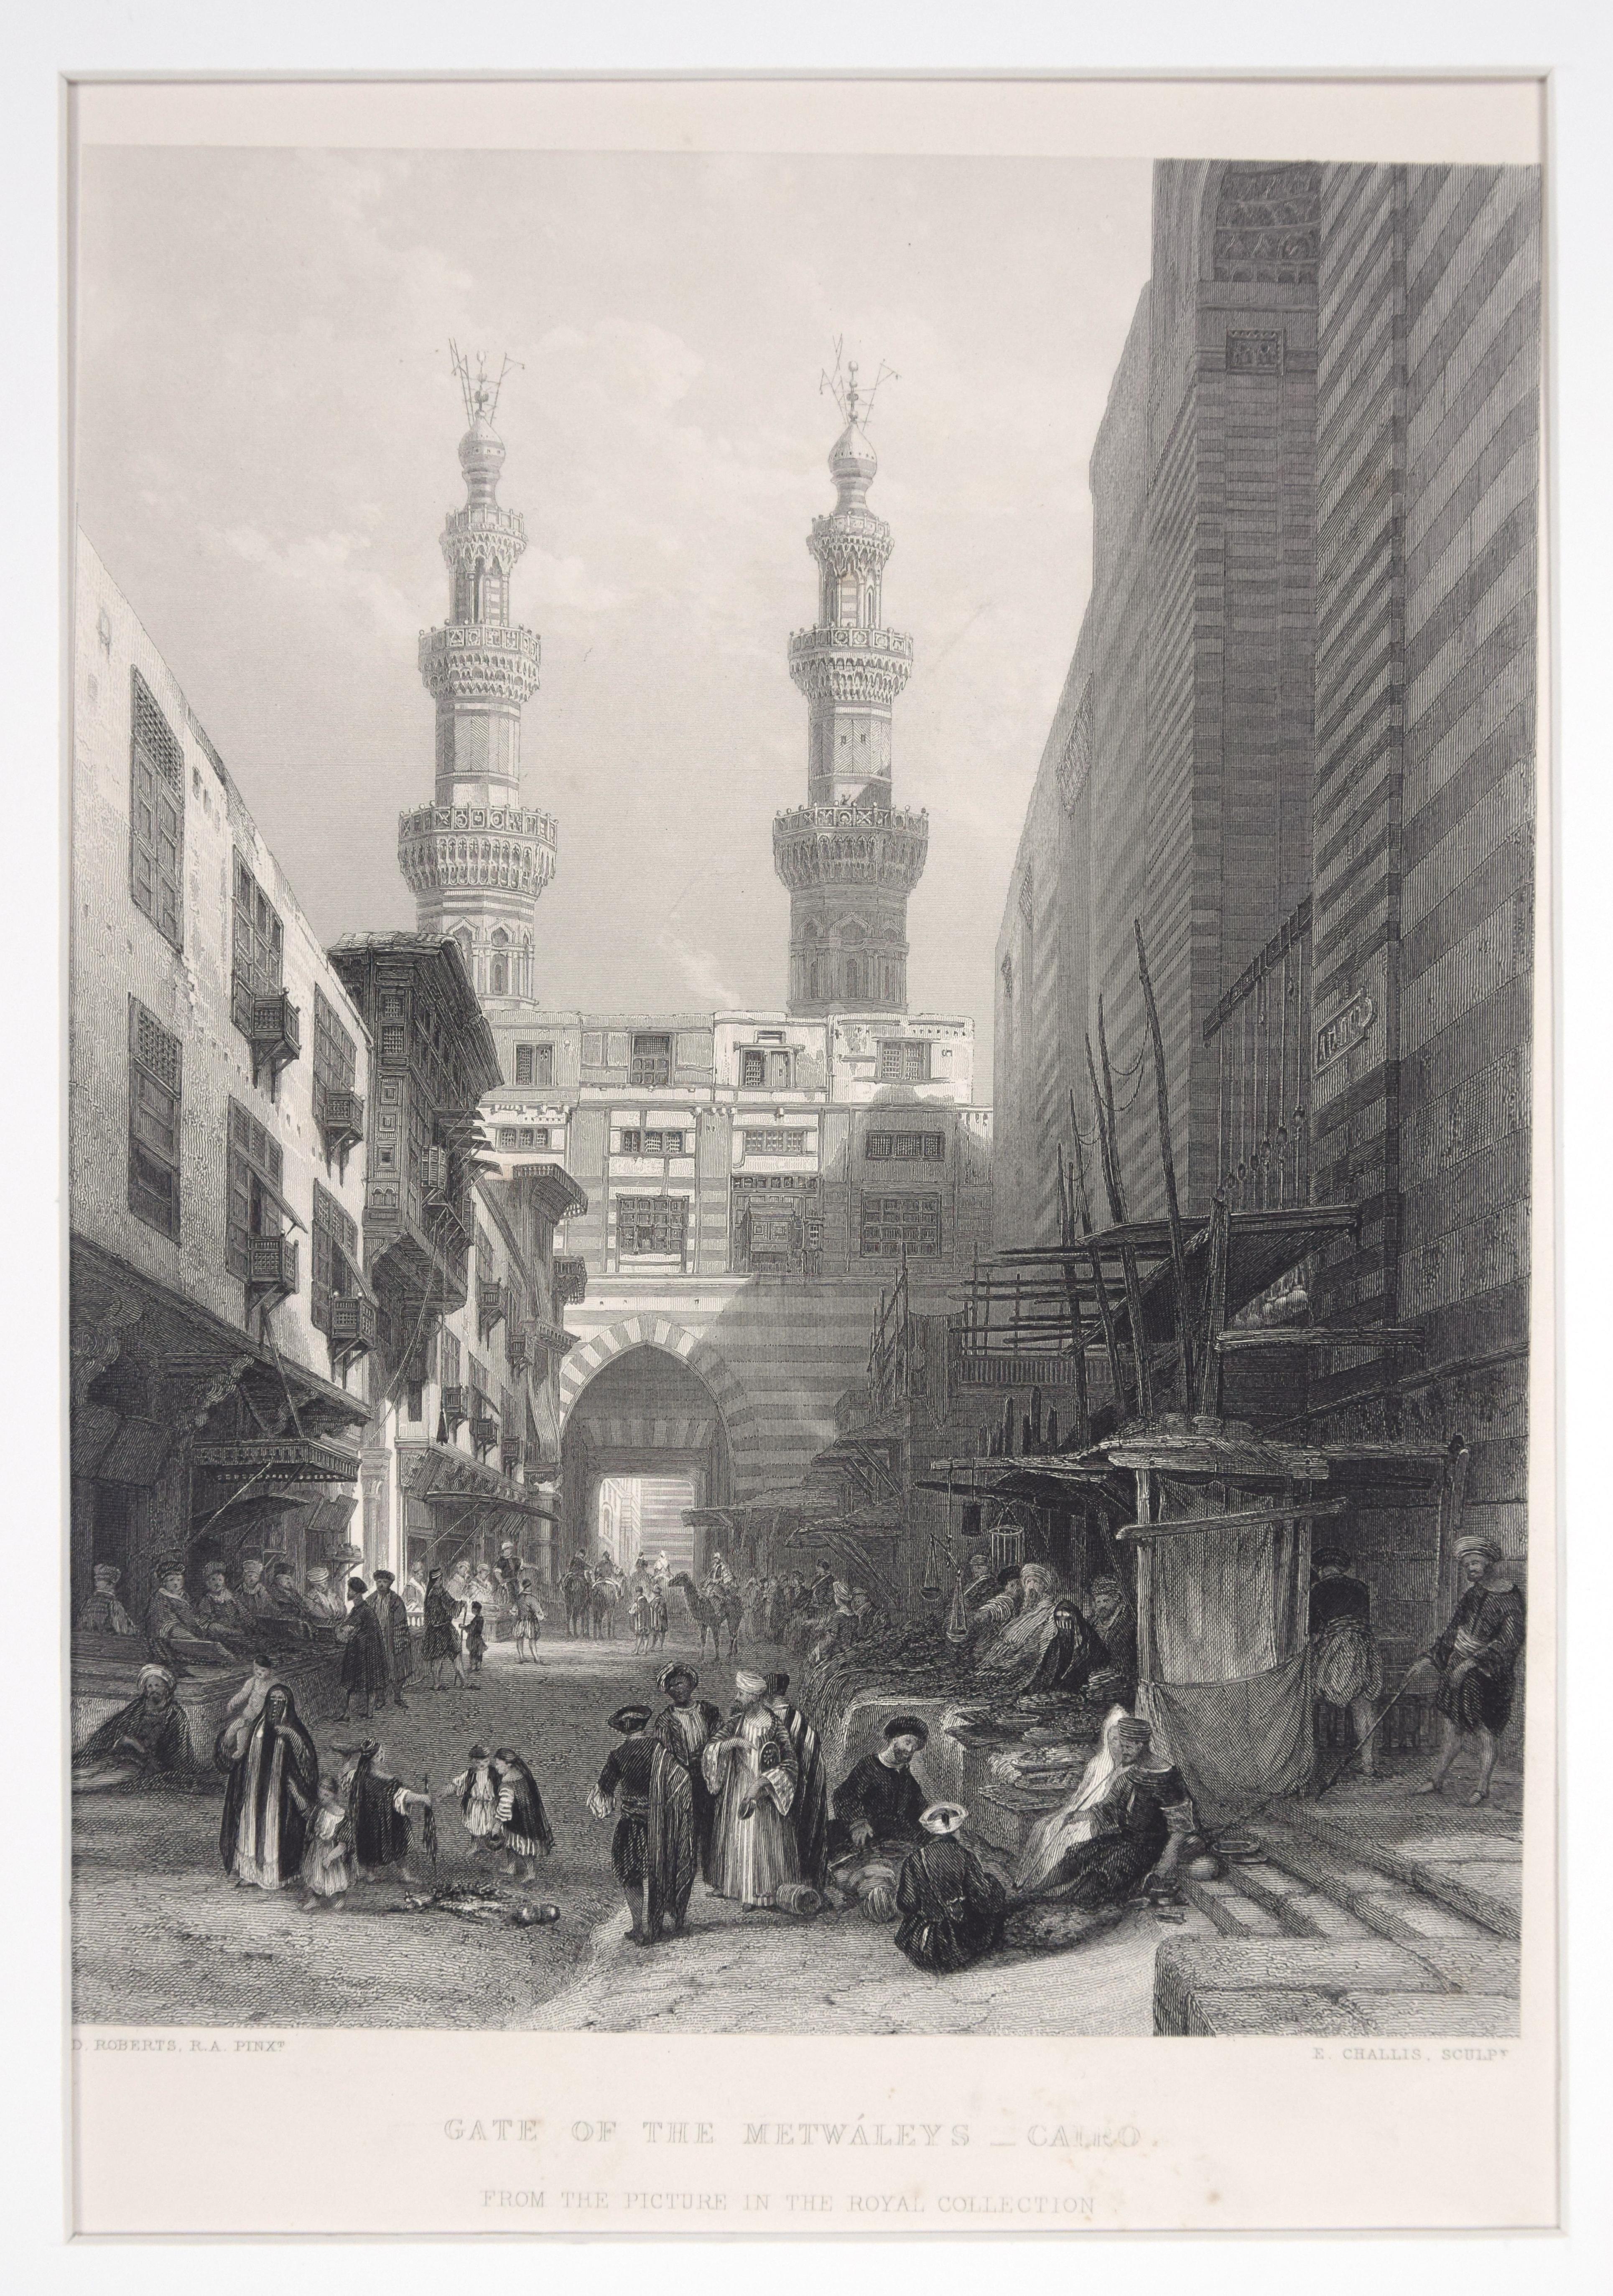 Gate Of The Metwáleys - Cairo - Original Etching by E. Challis - 1860s